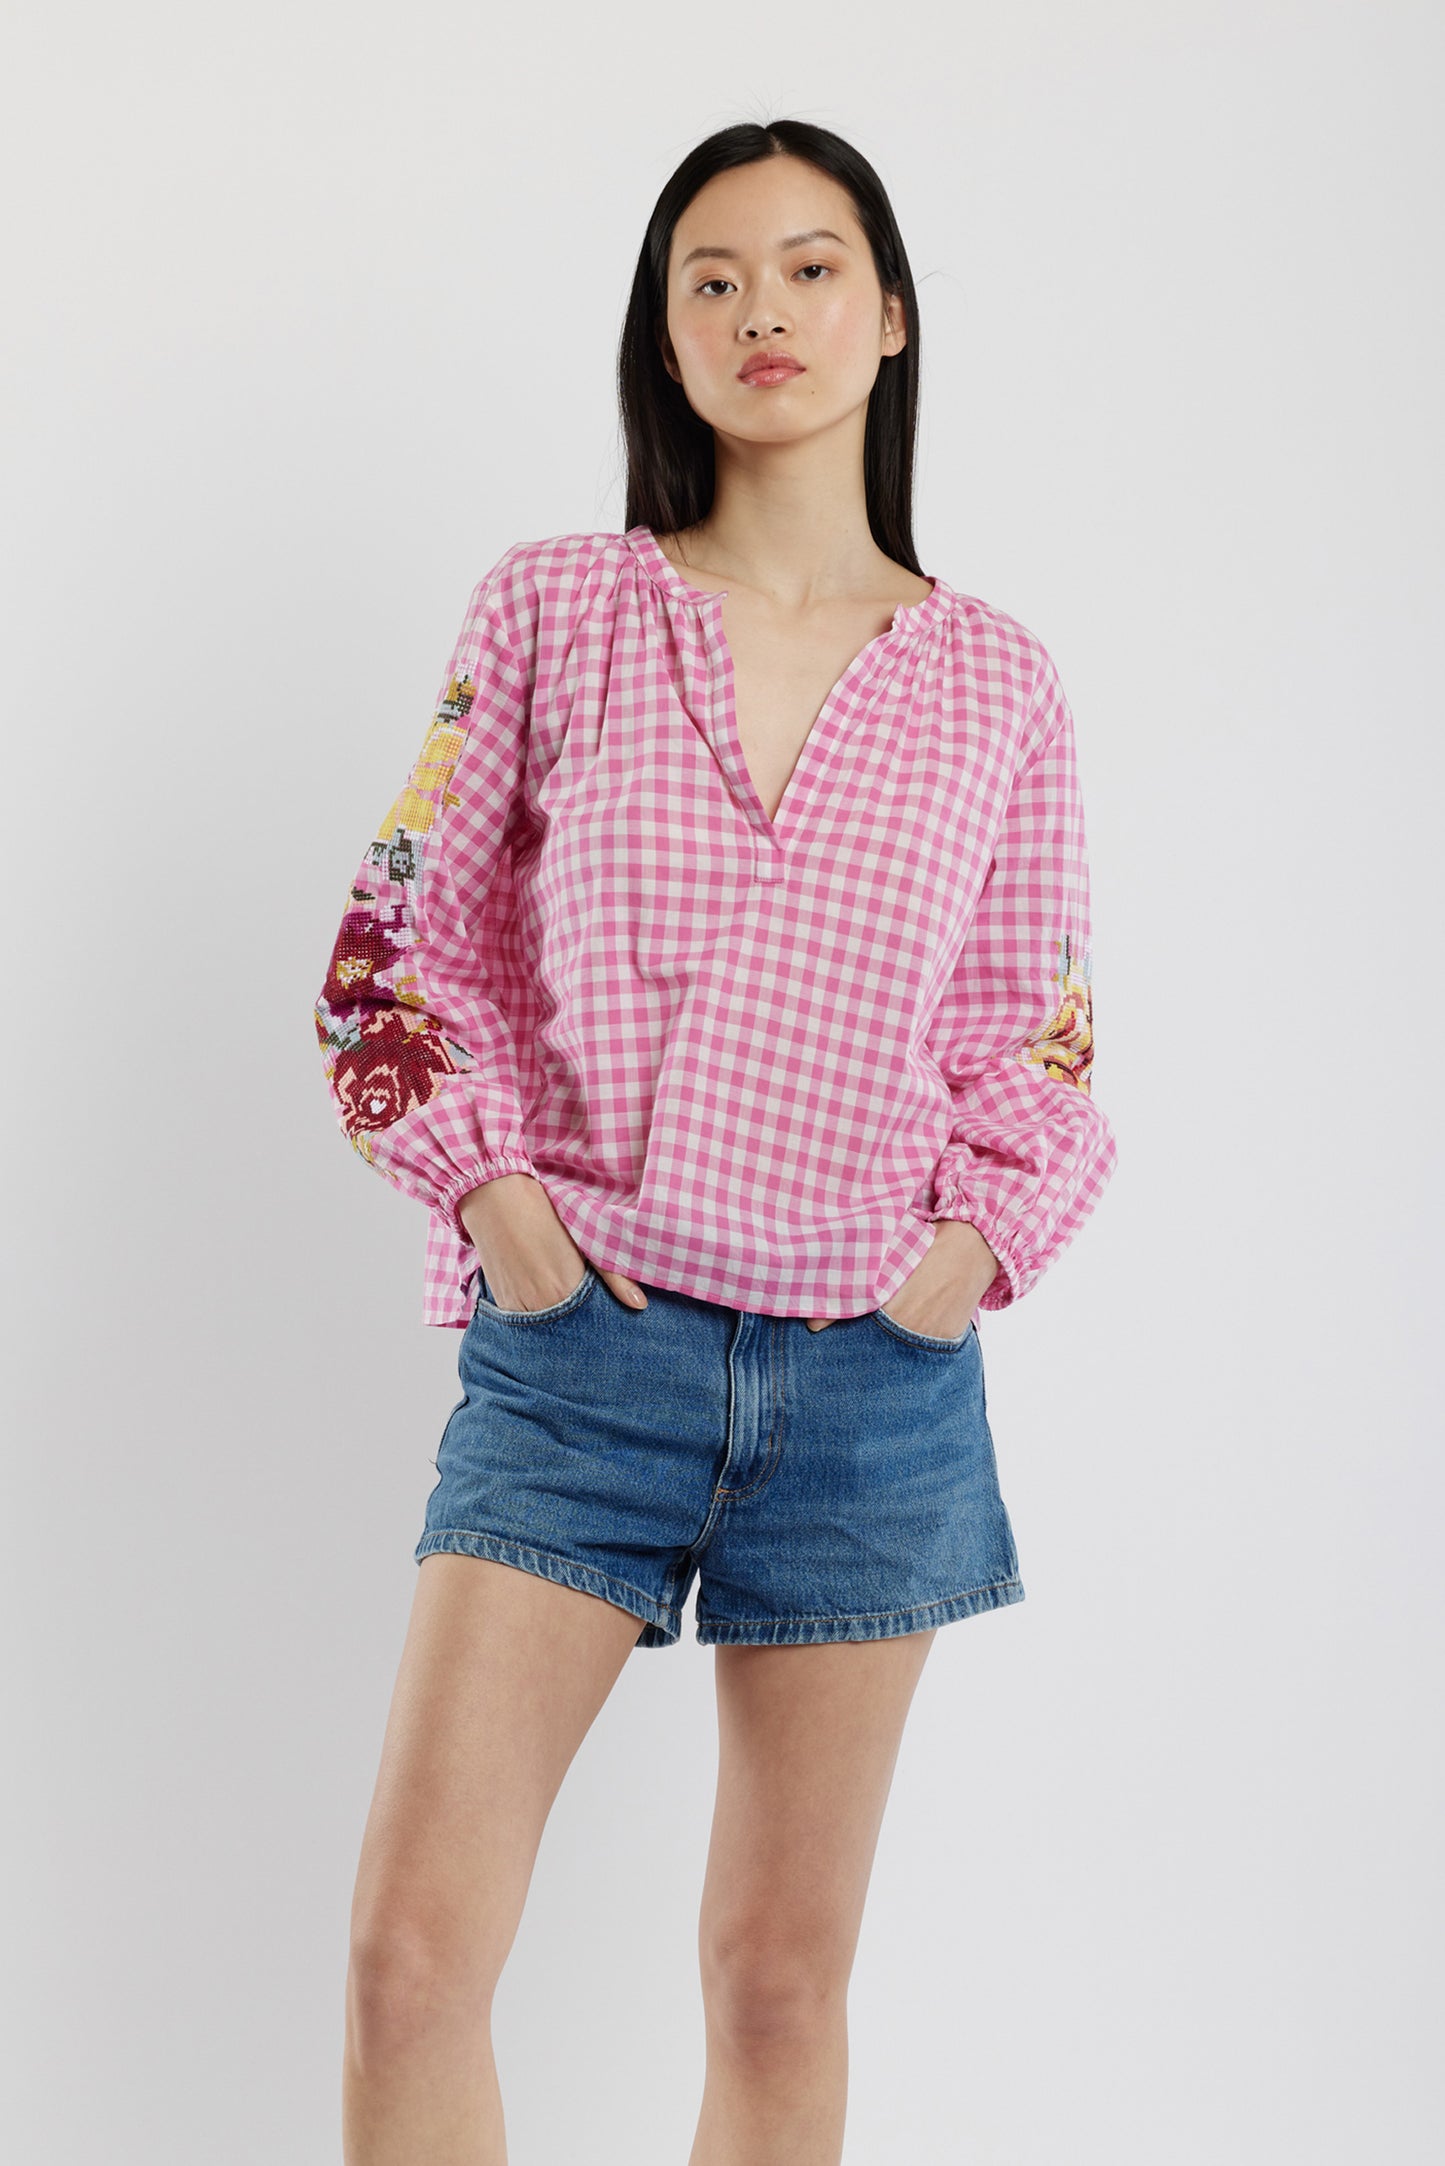 VICHY EMBROIDERED TOP PINK